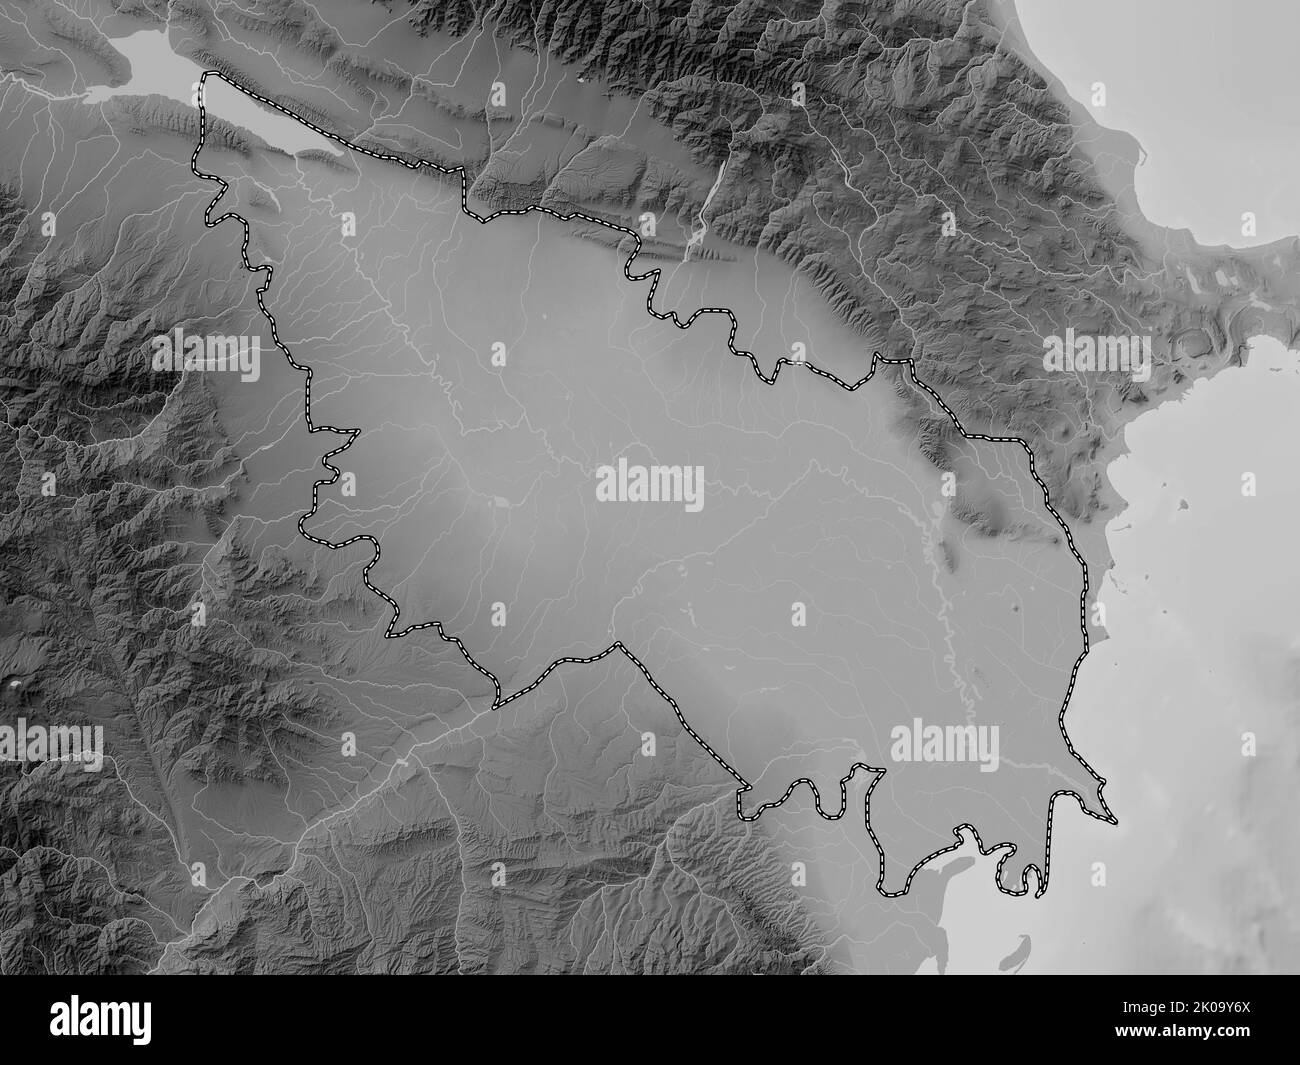 Aran, region of Azerbaijan. Grayscale elevation map with lakes and rivers Stock Photo